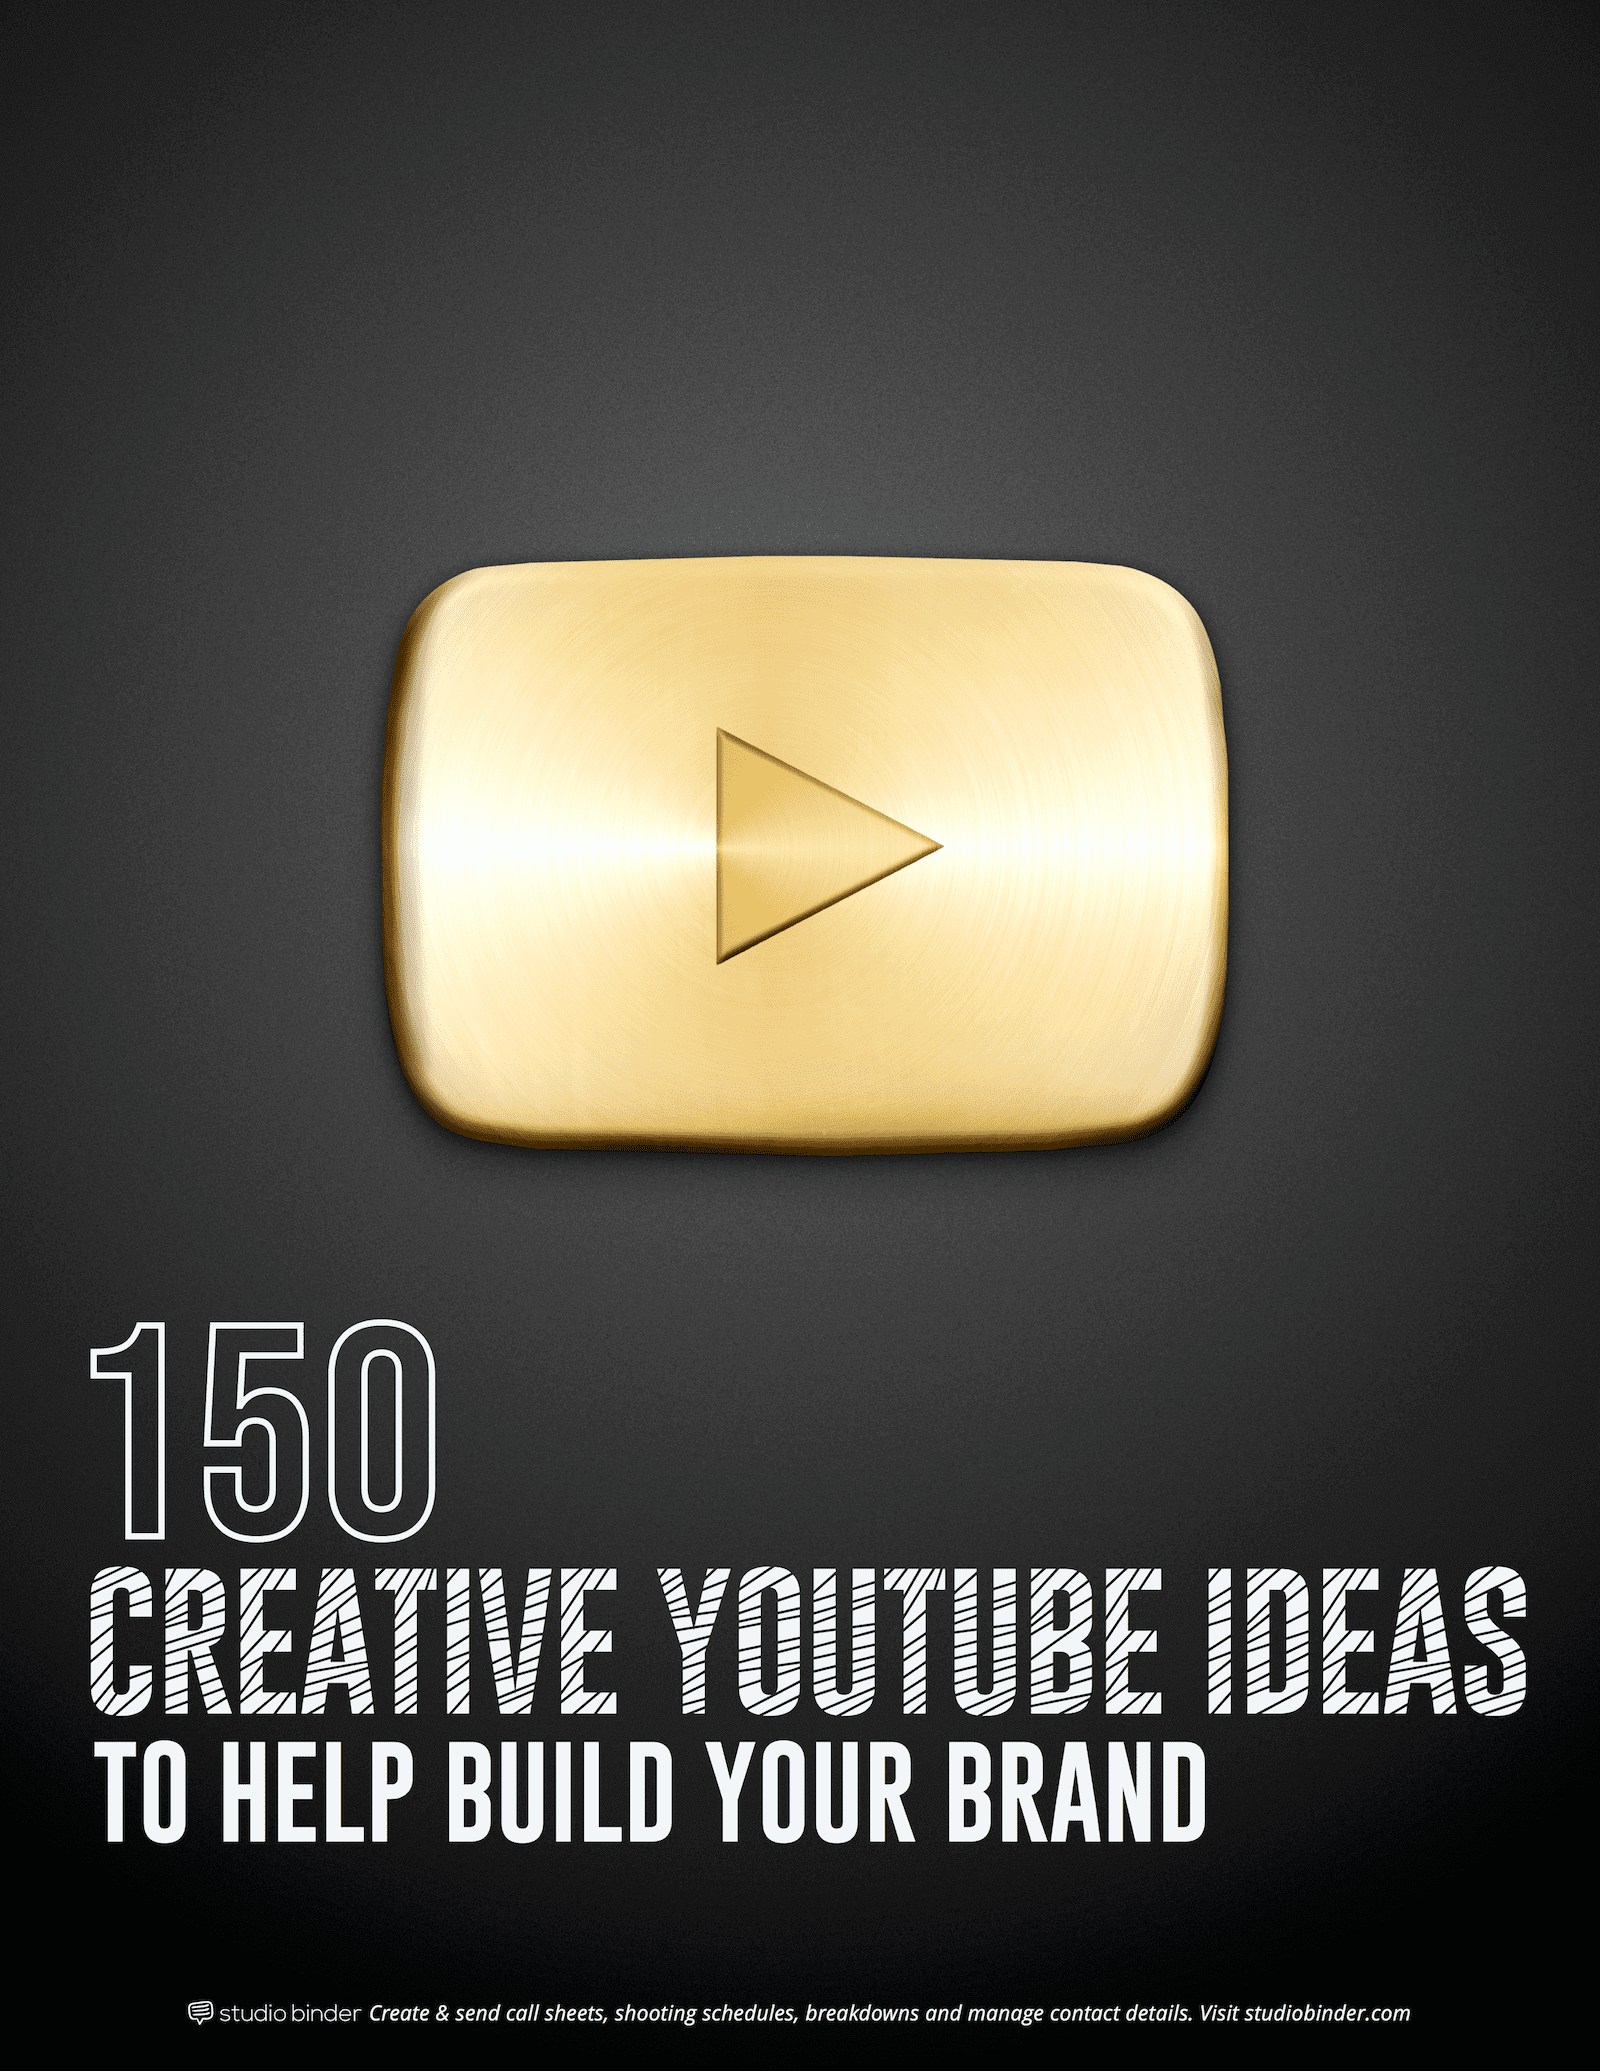 161 Creative Youtube Video Ideas To Try Free Channel Ideas List - 150 creative youtube ideas to build your brand cover page studiob!   inder